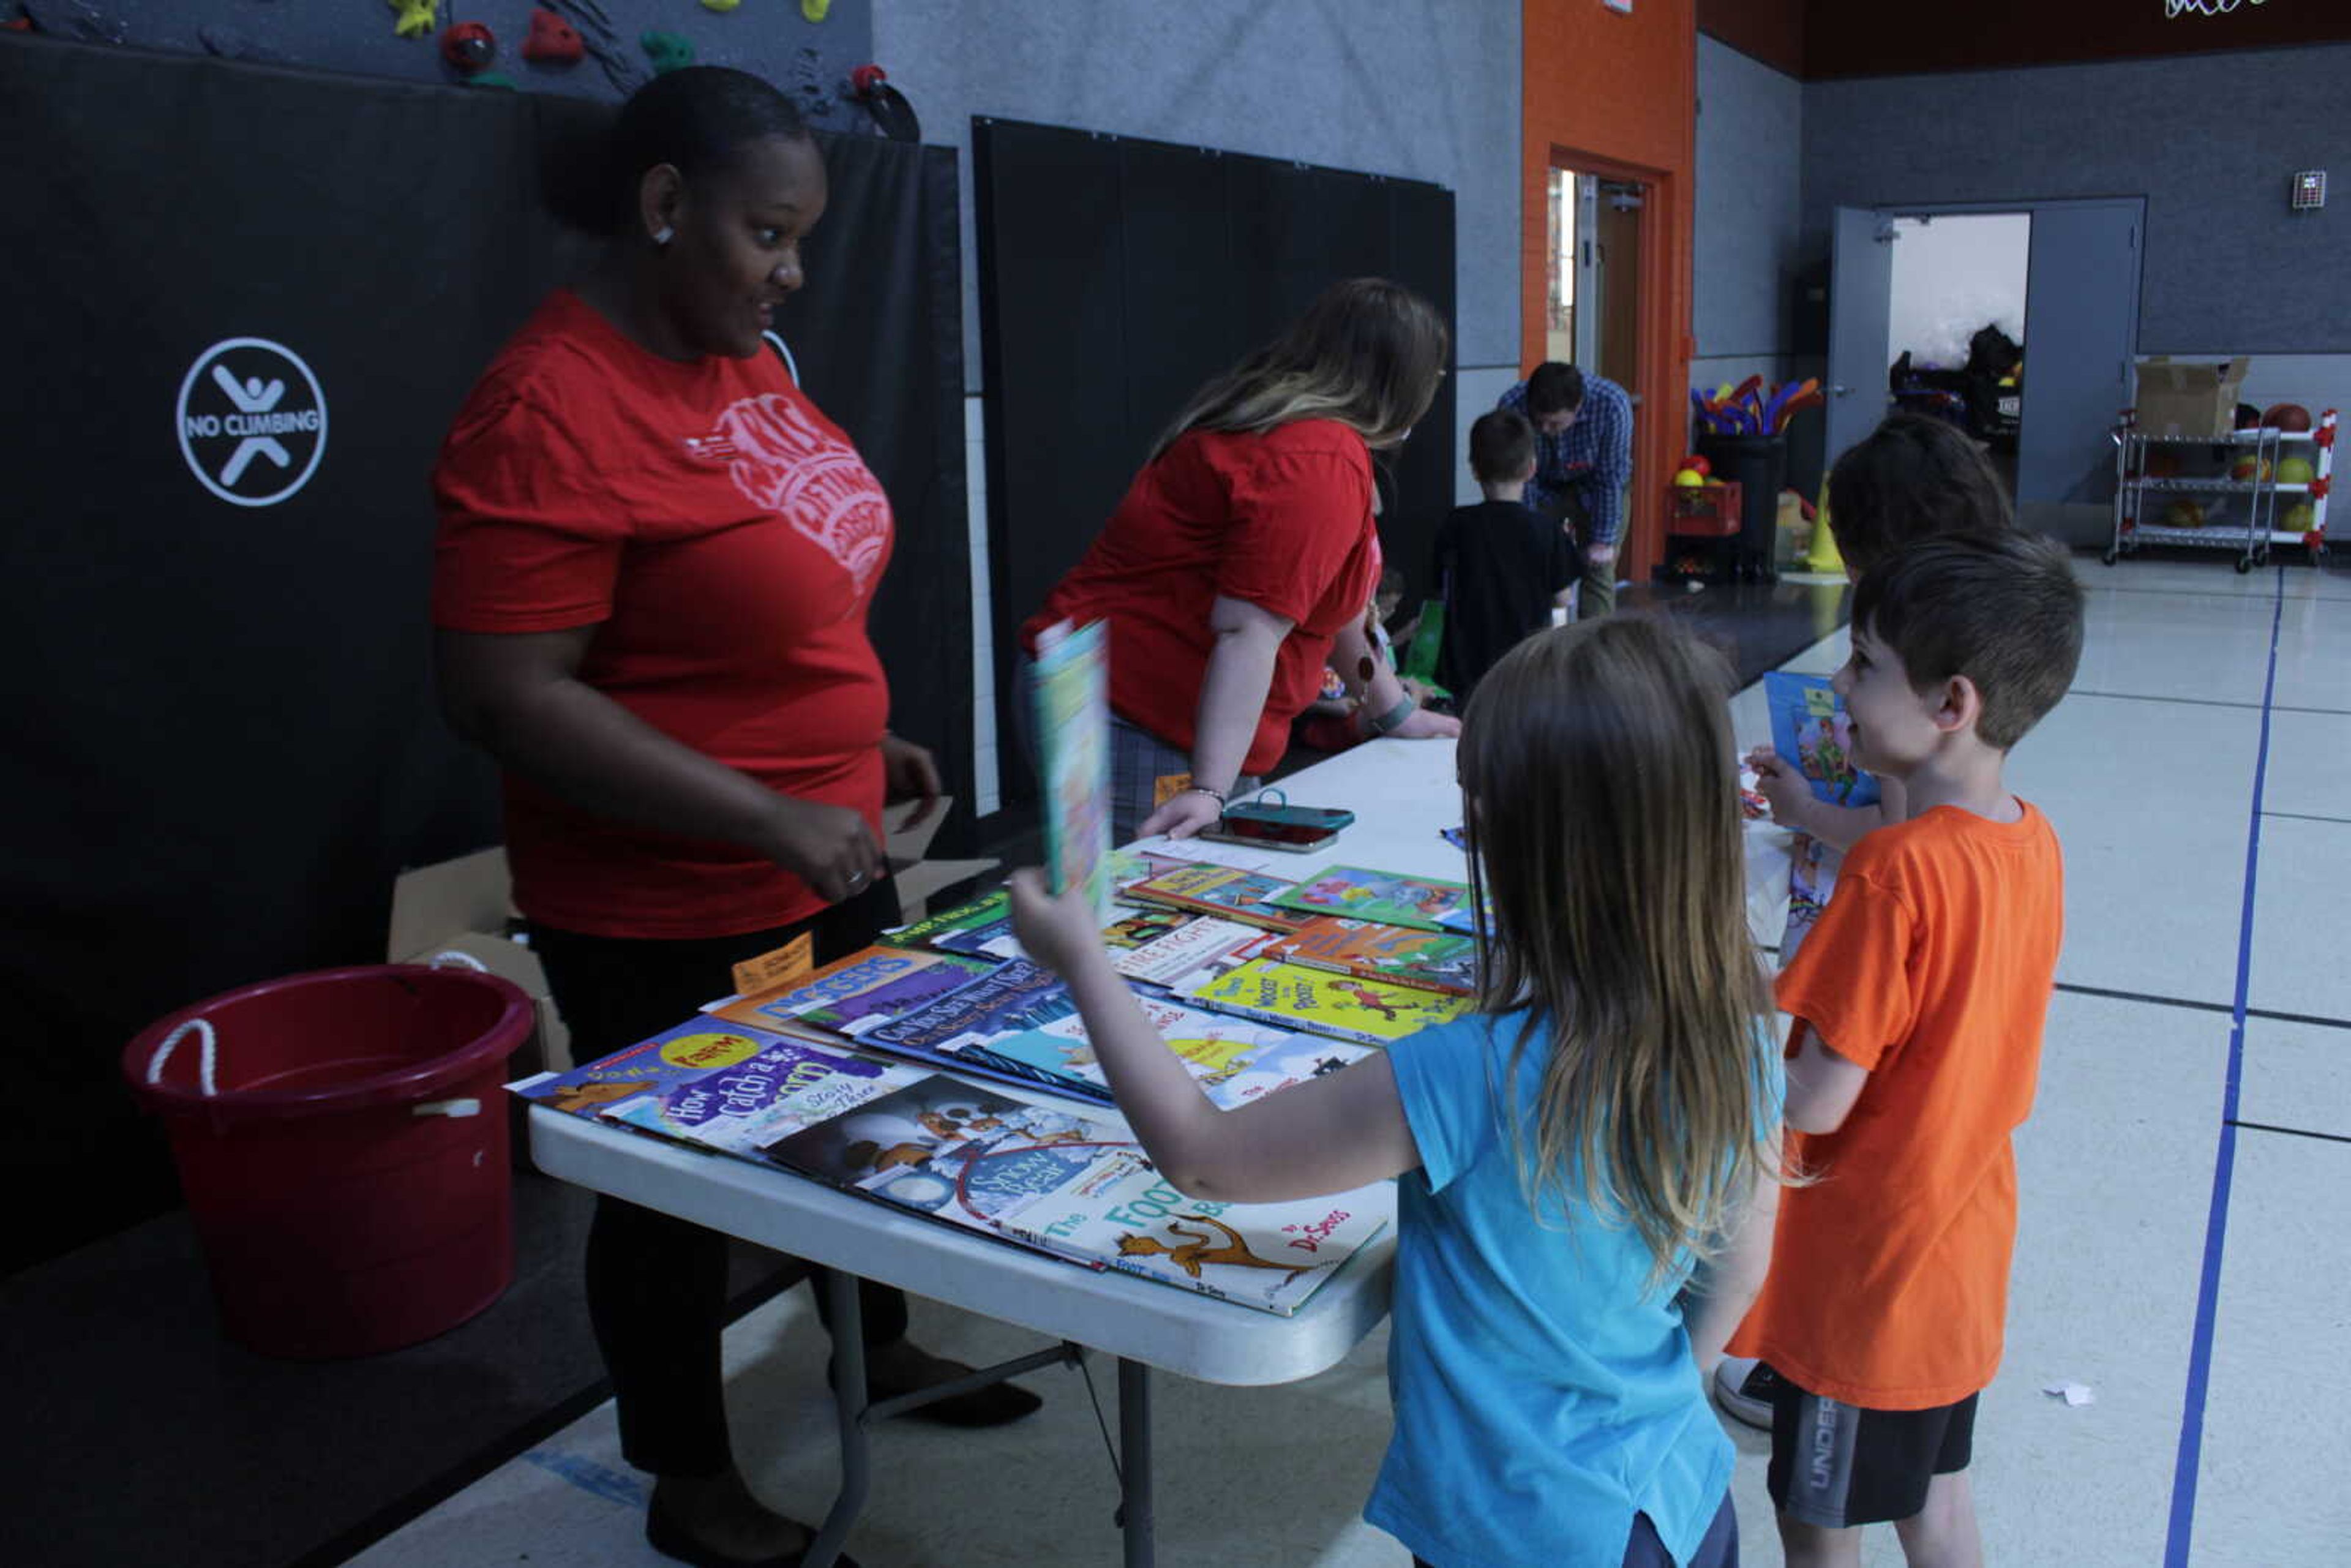 Senior early childhood education majors Erin King (right) and Bridgette Berner (left) hand out candy and books to students after completing the literacy walk. King is the public relations manager for SMSTA and Berner is the vice president.